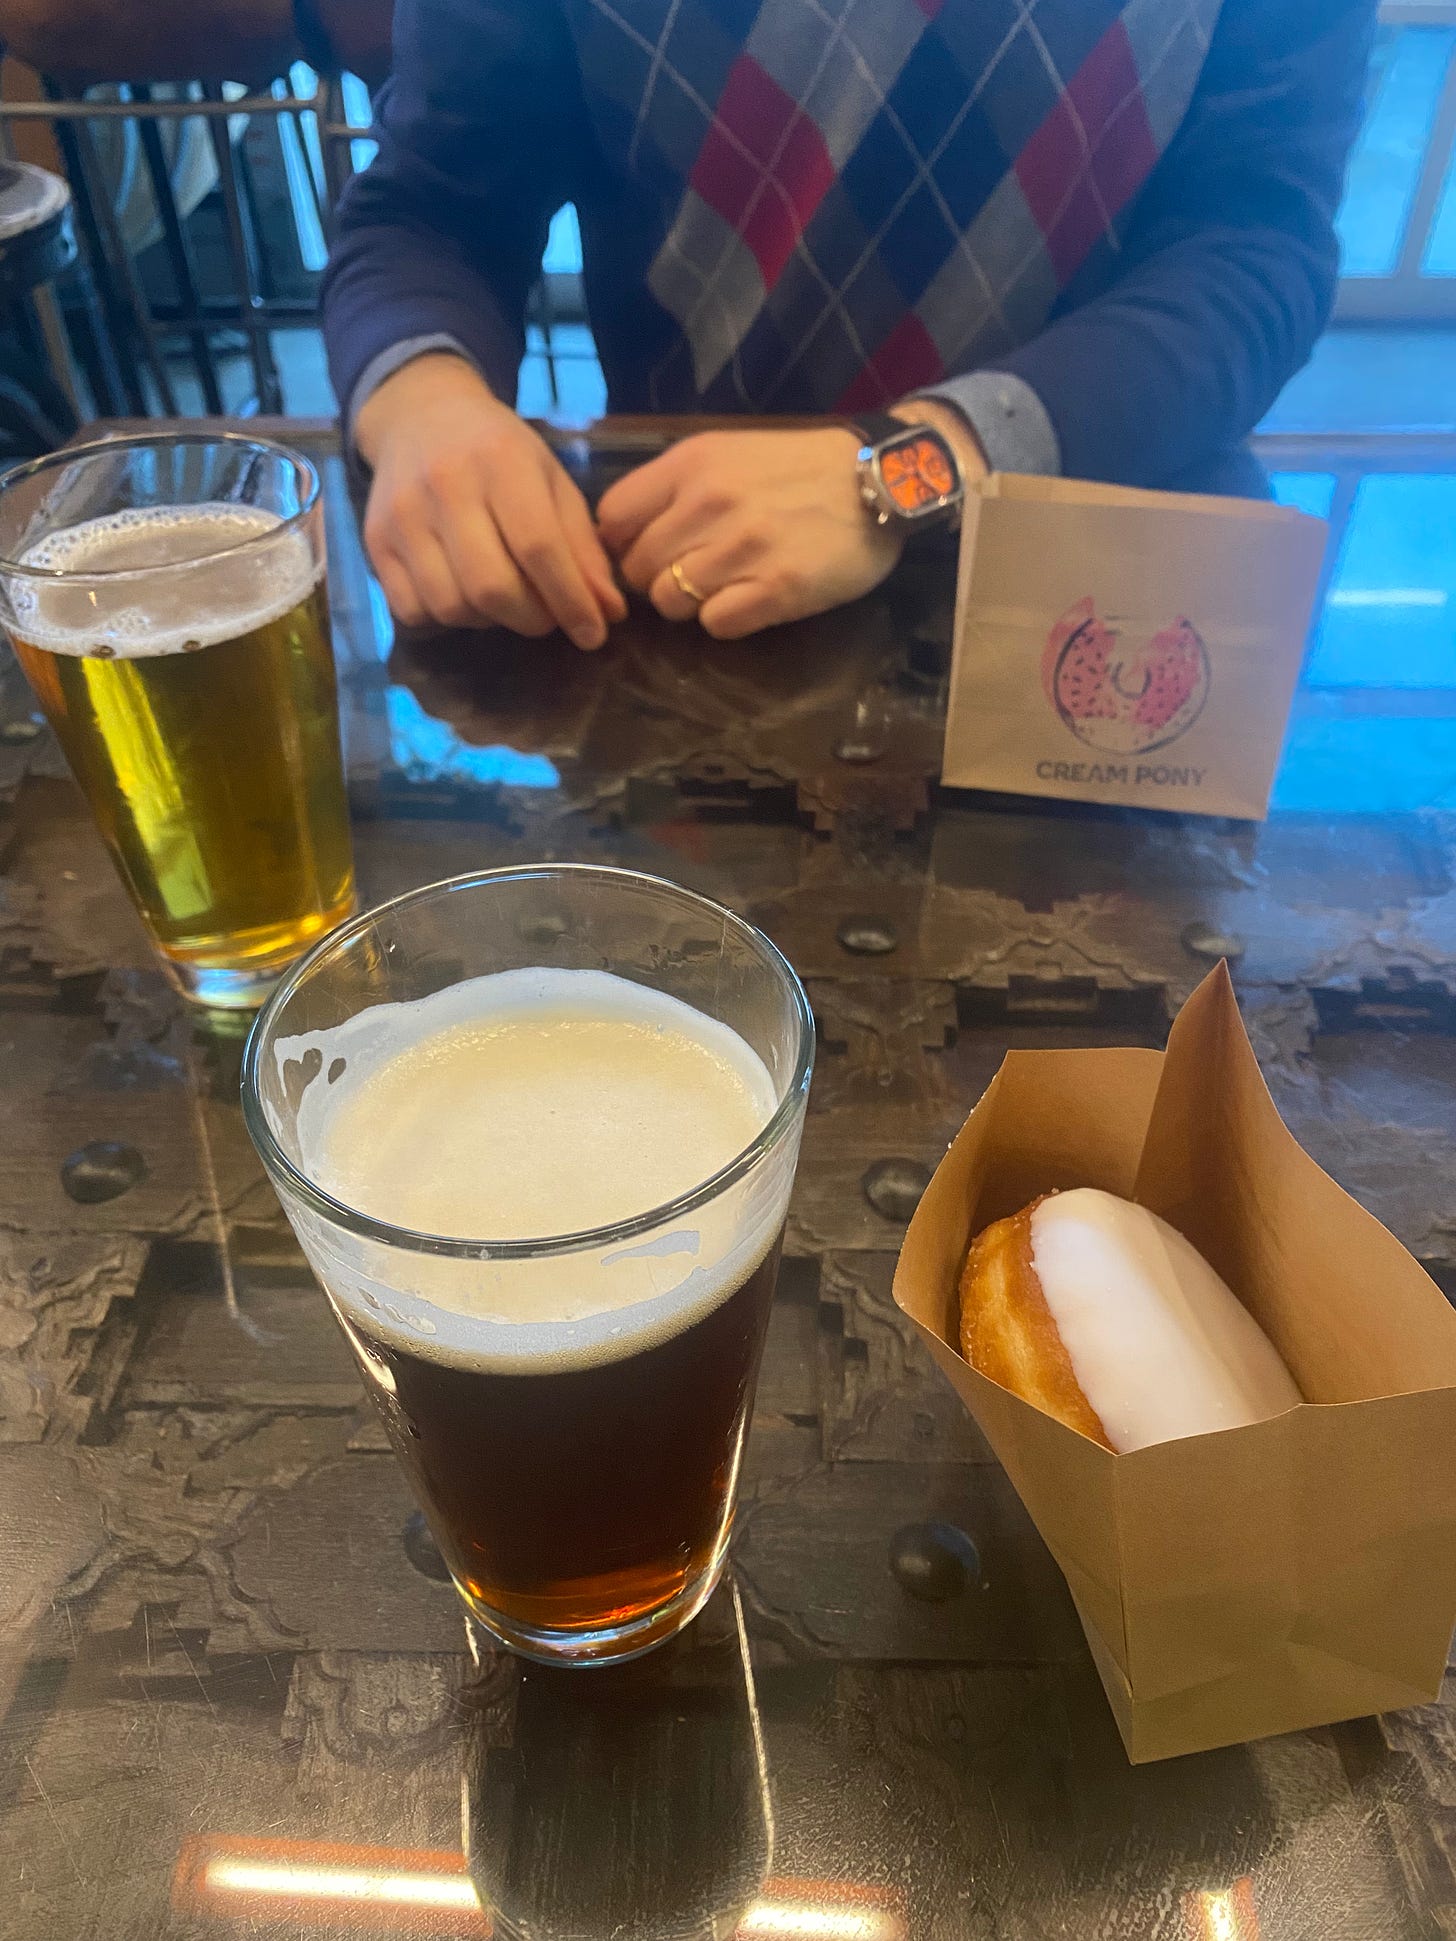 A table at House of Funk Brewing, with a glass of dark beer and a donut with white glaze in a paper bag in the foreground. In the background is a lighter beer and another paper bag with the Cream Pony logo stamped on the front. Jeff's hands are on the table between them, and he is wearing a blue argyle sweater.